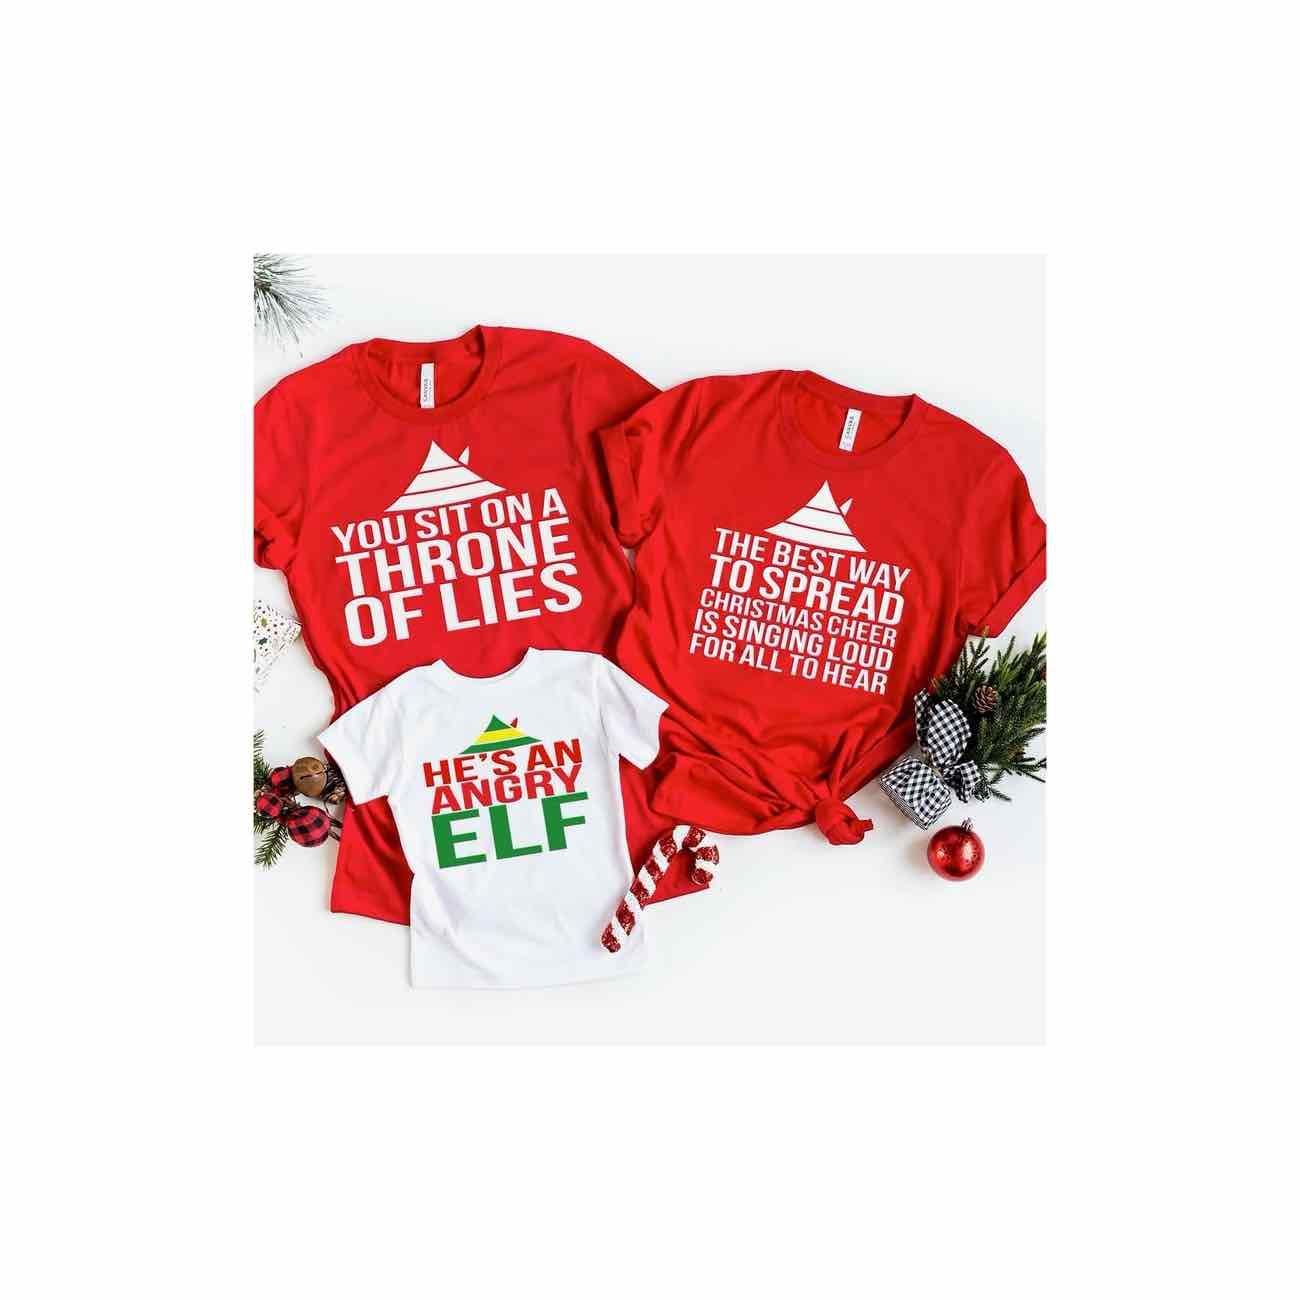 the middle to merry little chirstmas matching family shirts for Christmas Card photo little